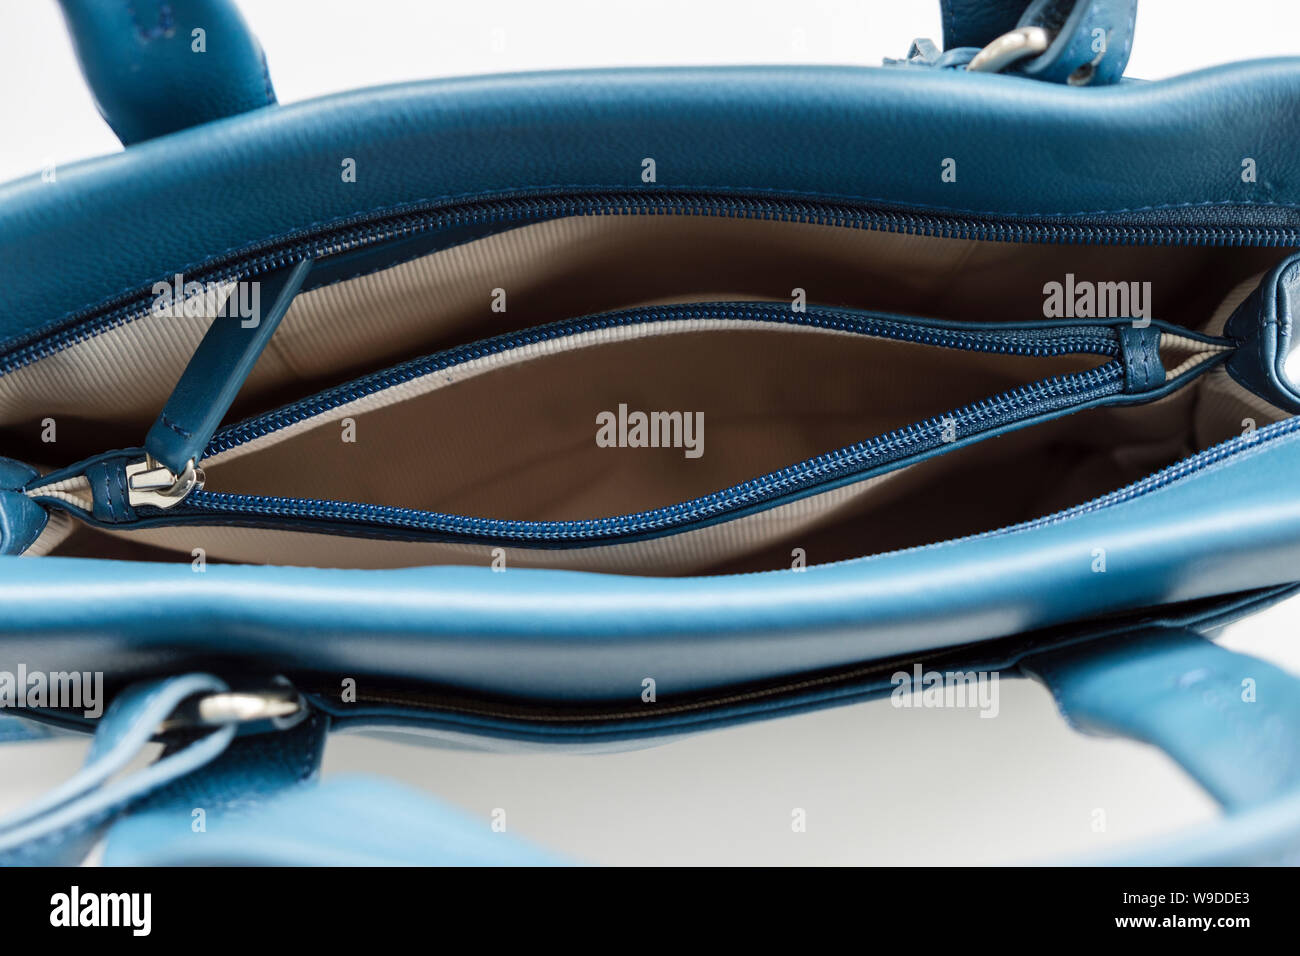 Top down view looking into an open zipped inner pocket compartment inside an empty handbag purse from above. Stock Photo